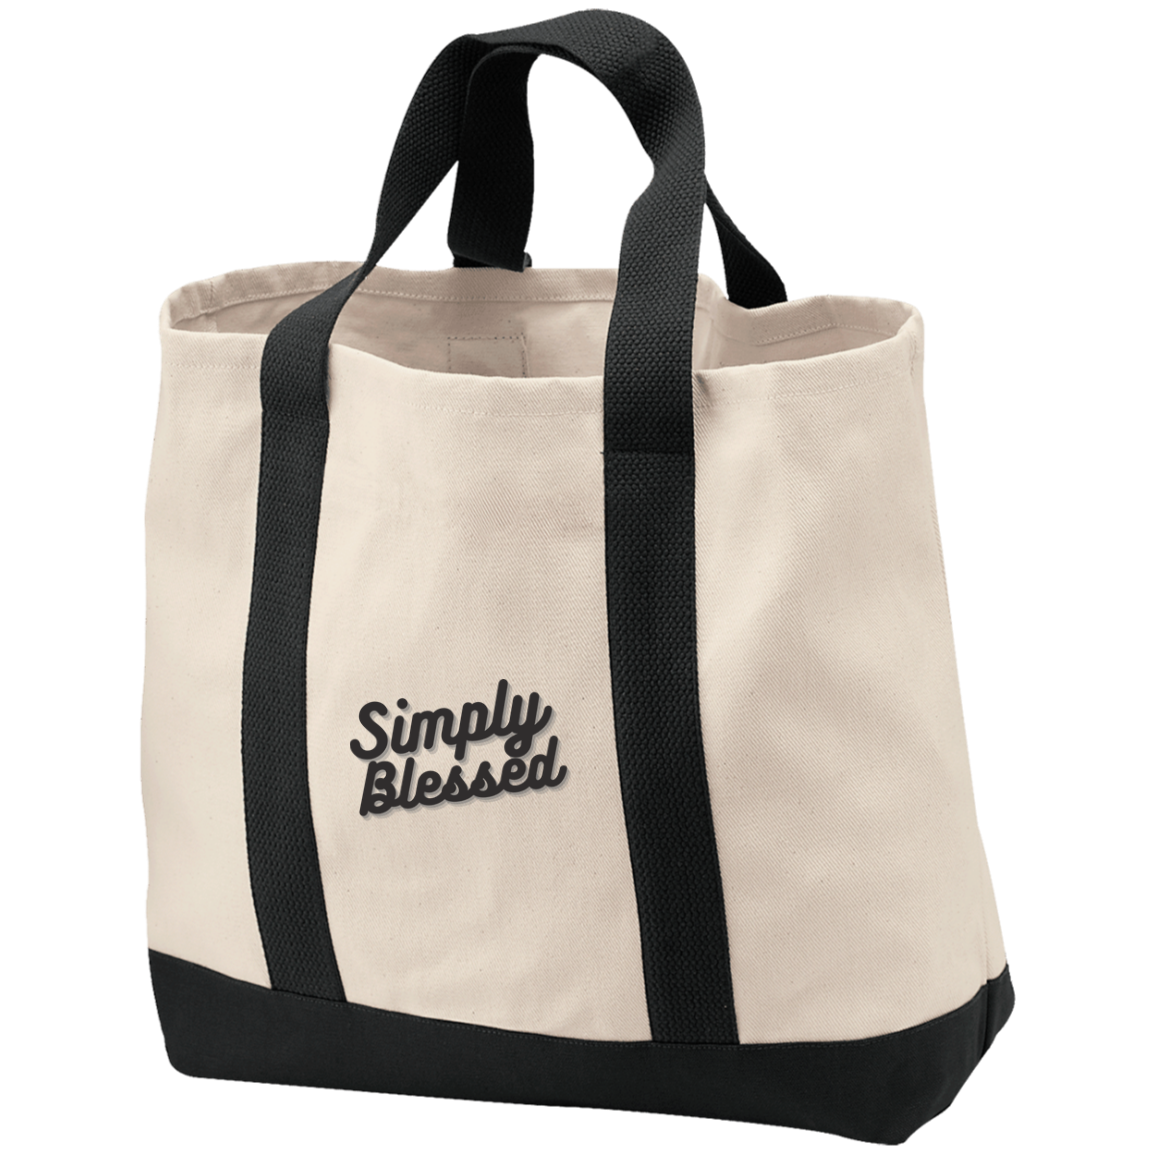 Simply Blessed - 2-Tone Shopping Tote